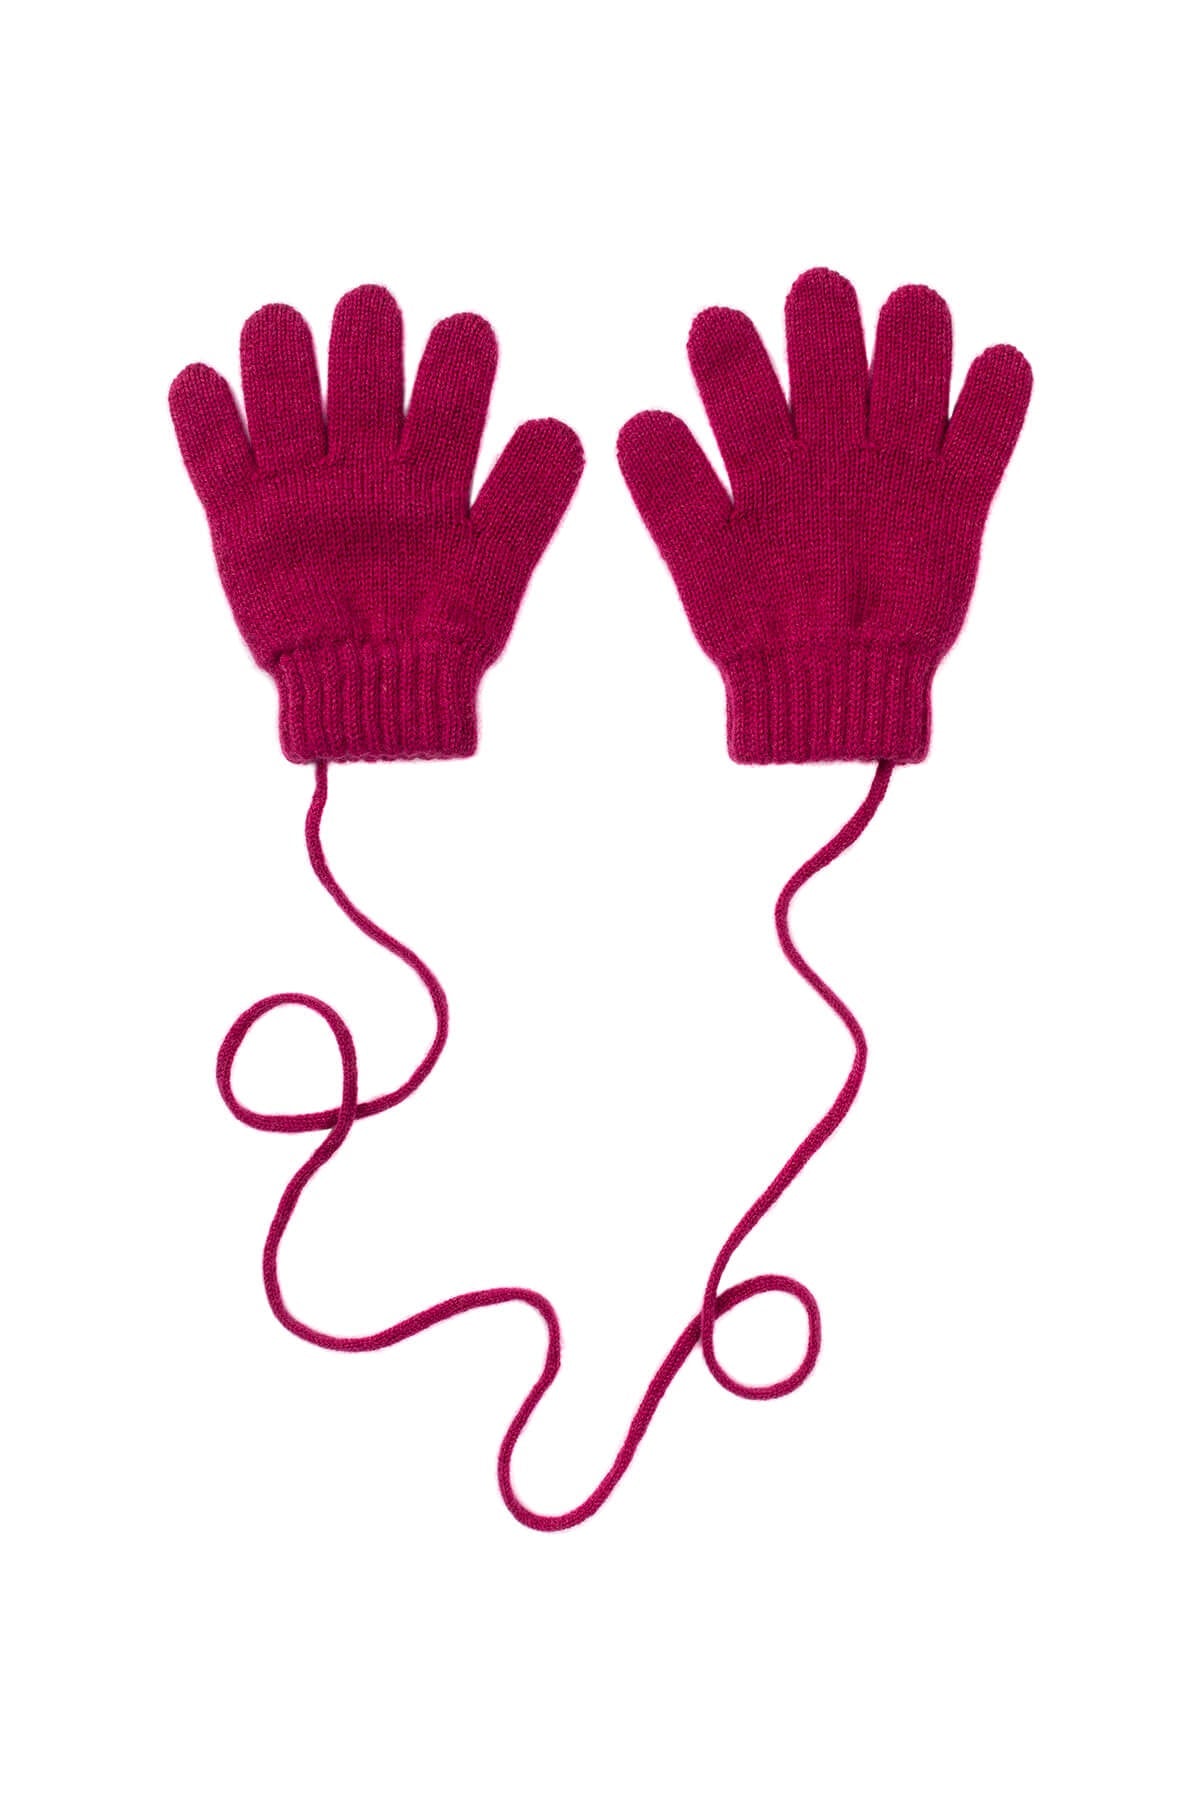 Johnstons of Elgin Children's Cashmere Gloves in Mulberry with Cashmere String on white background HAD02203SE4770